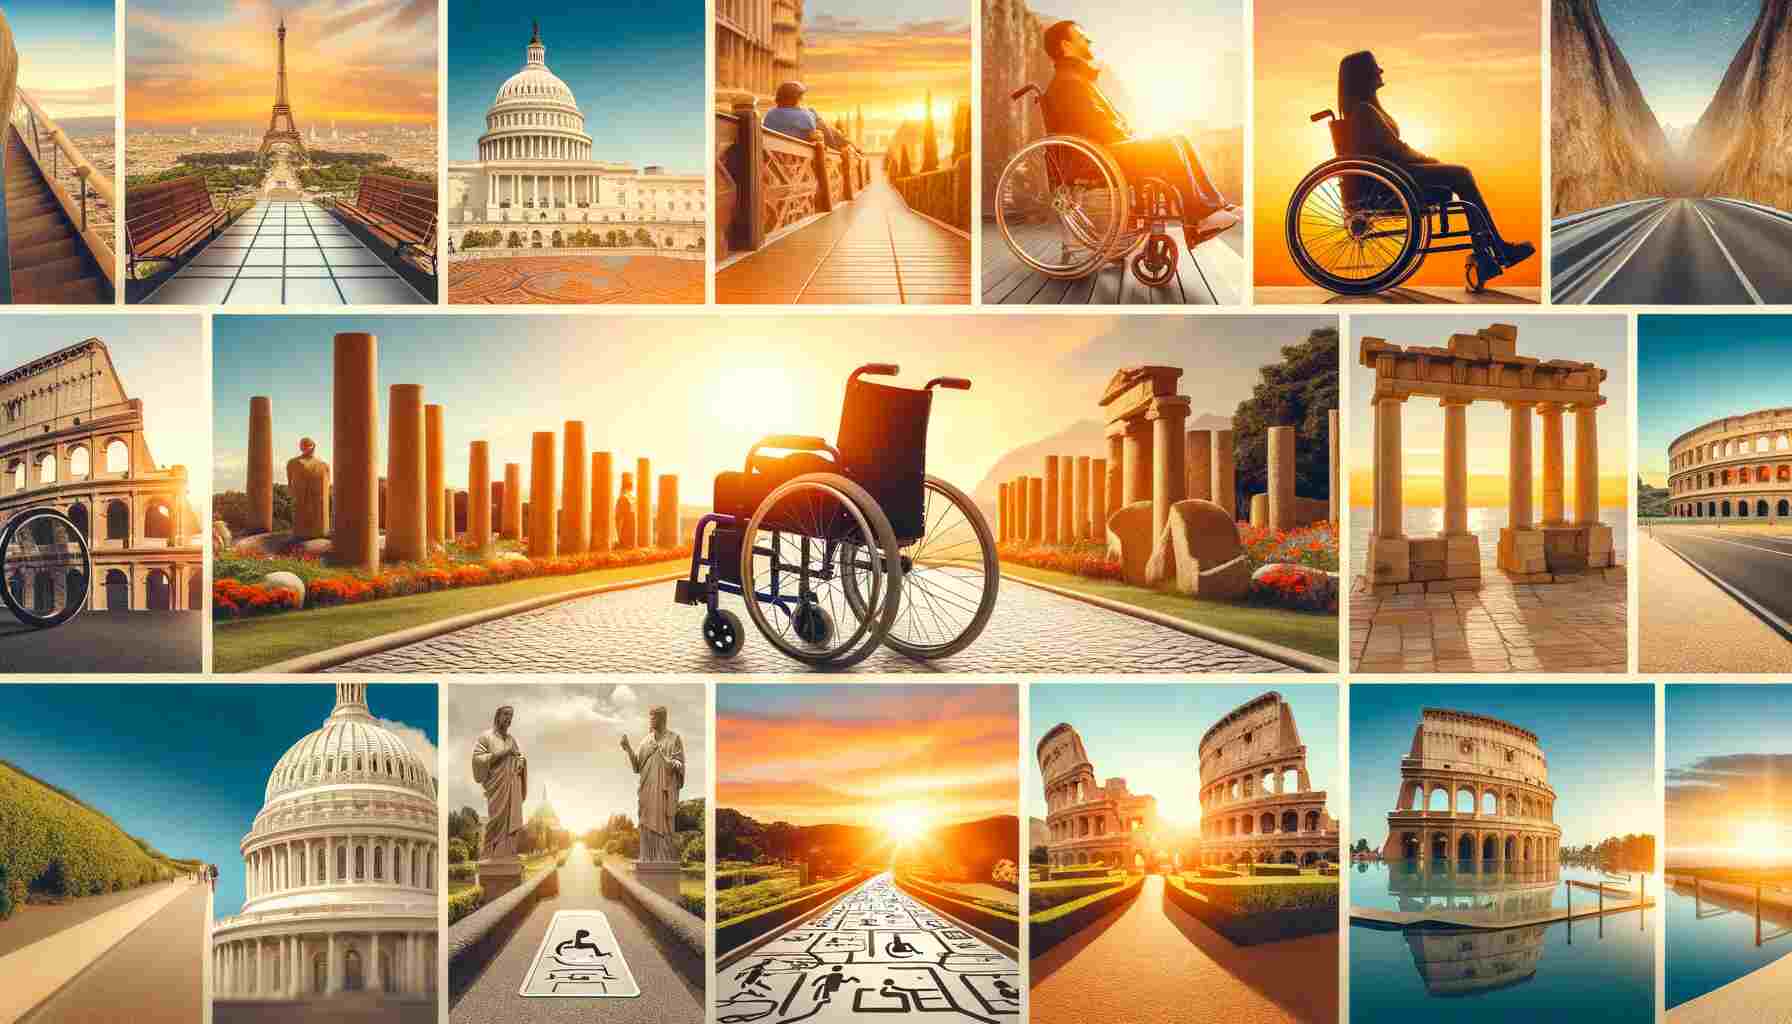 Here's the featured image for The World's Most Wheelchair-Accessible Travel Destinations, showcasing various landmarks known for their accessibility.